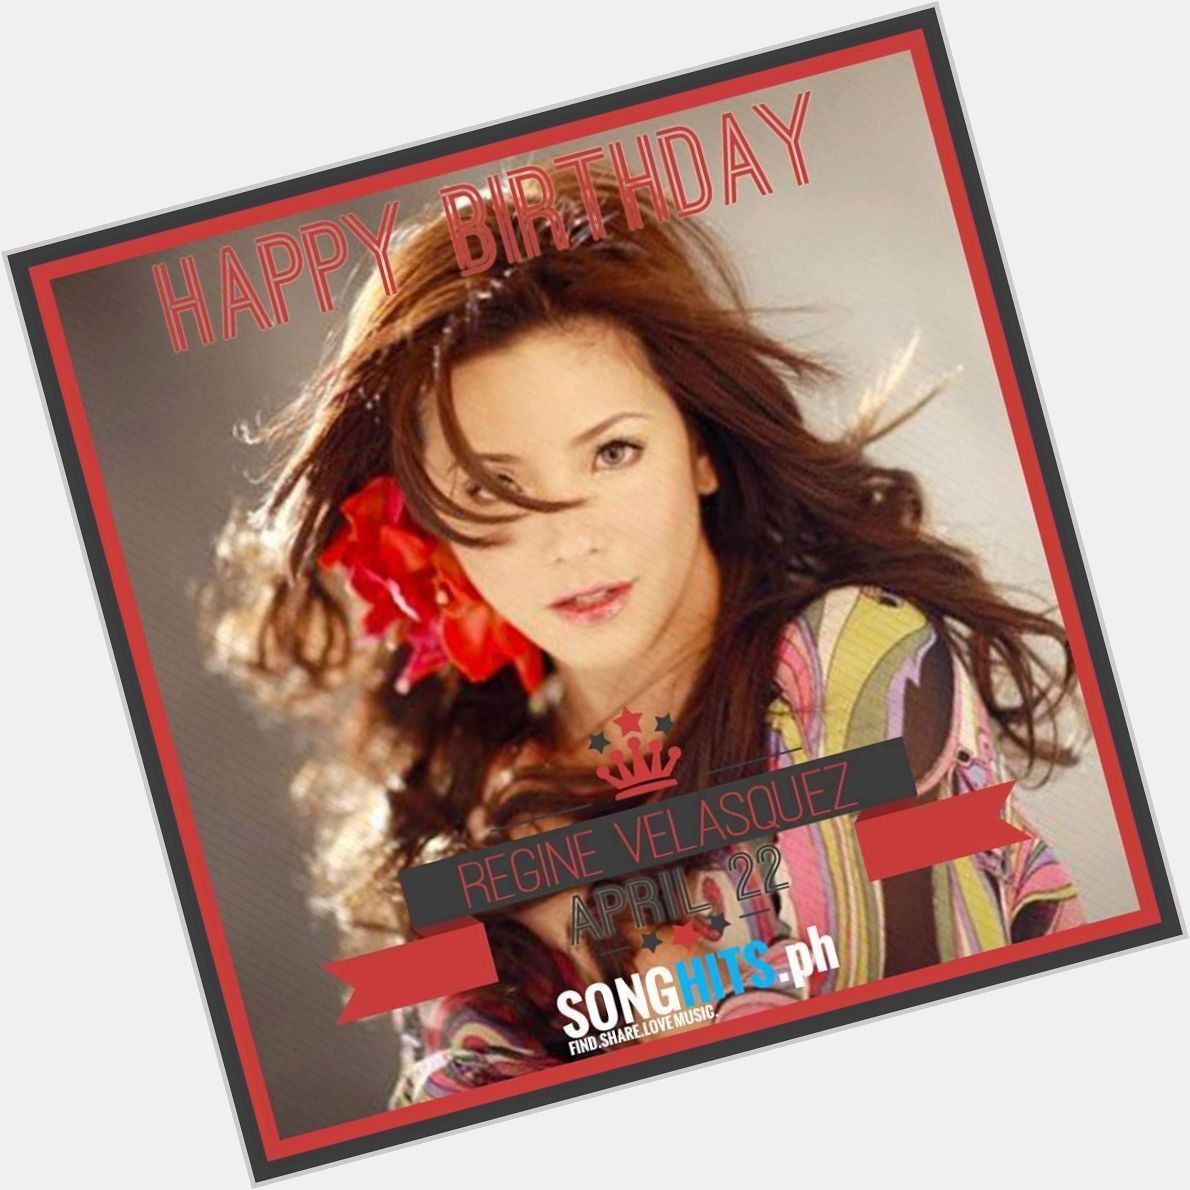 Happy Birthday Ms. Regine Velasquez. Check out here SongHits Profile ->  